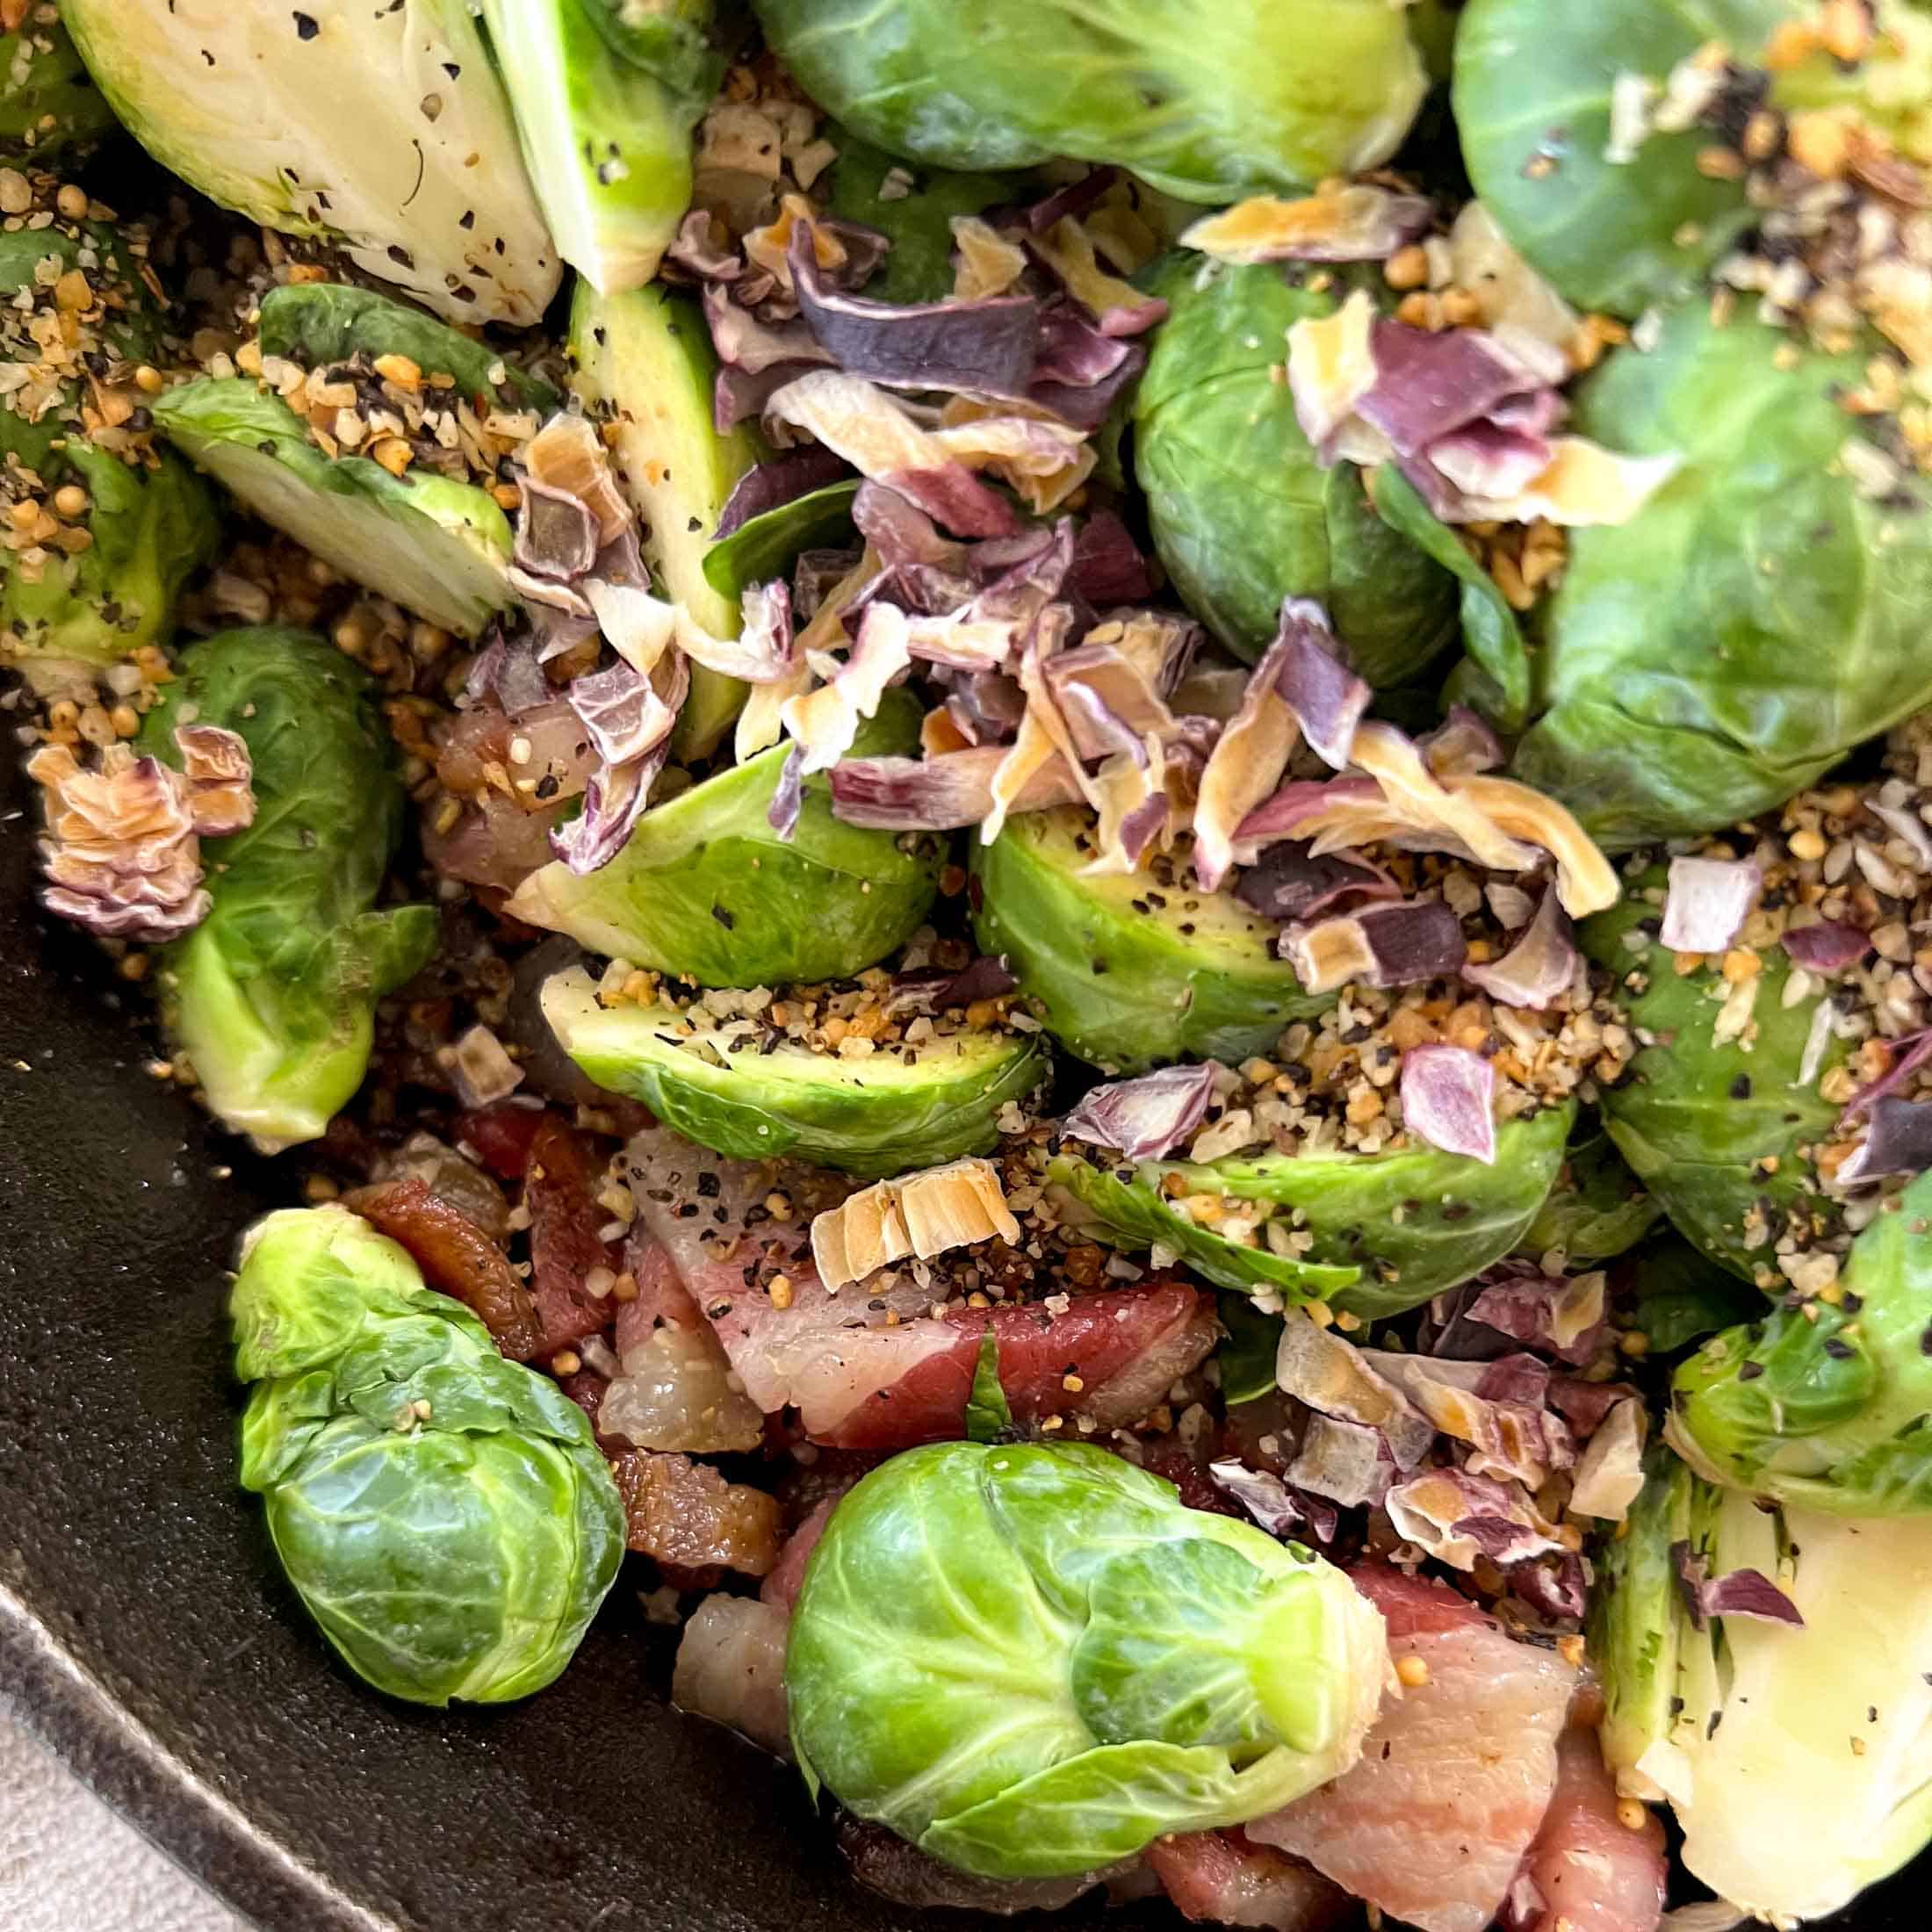 Dehydrated onions and steak spice sprinkled on top of raw brussel sprouts and crispy bacon.